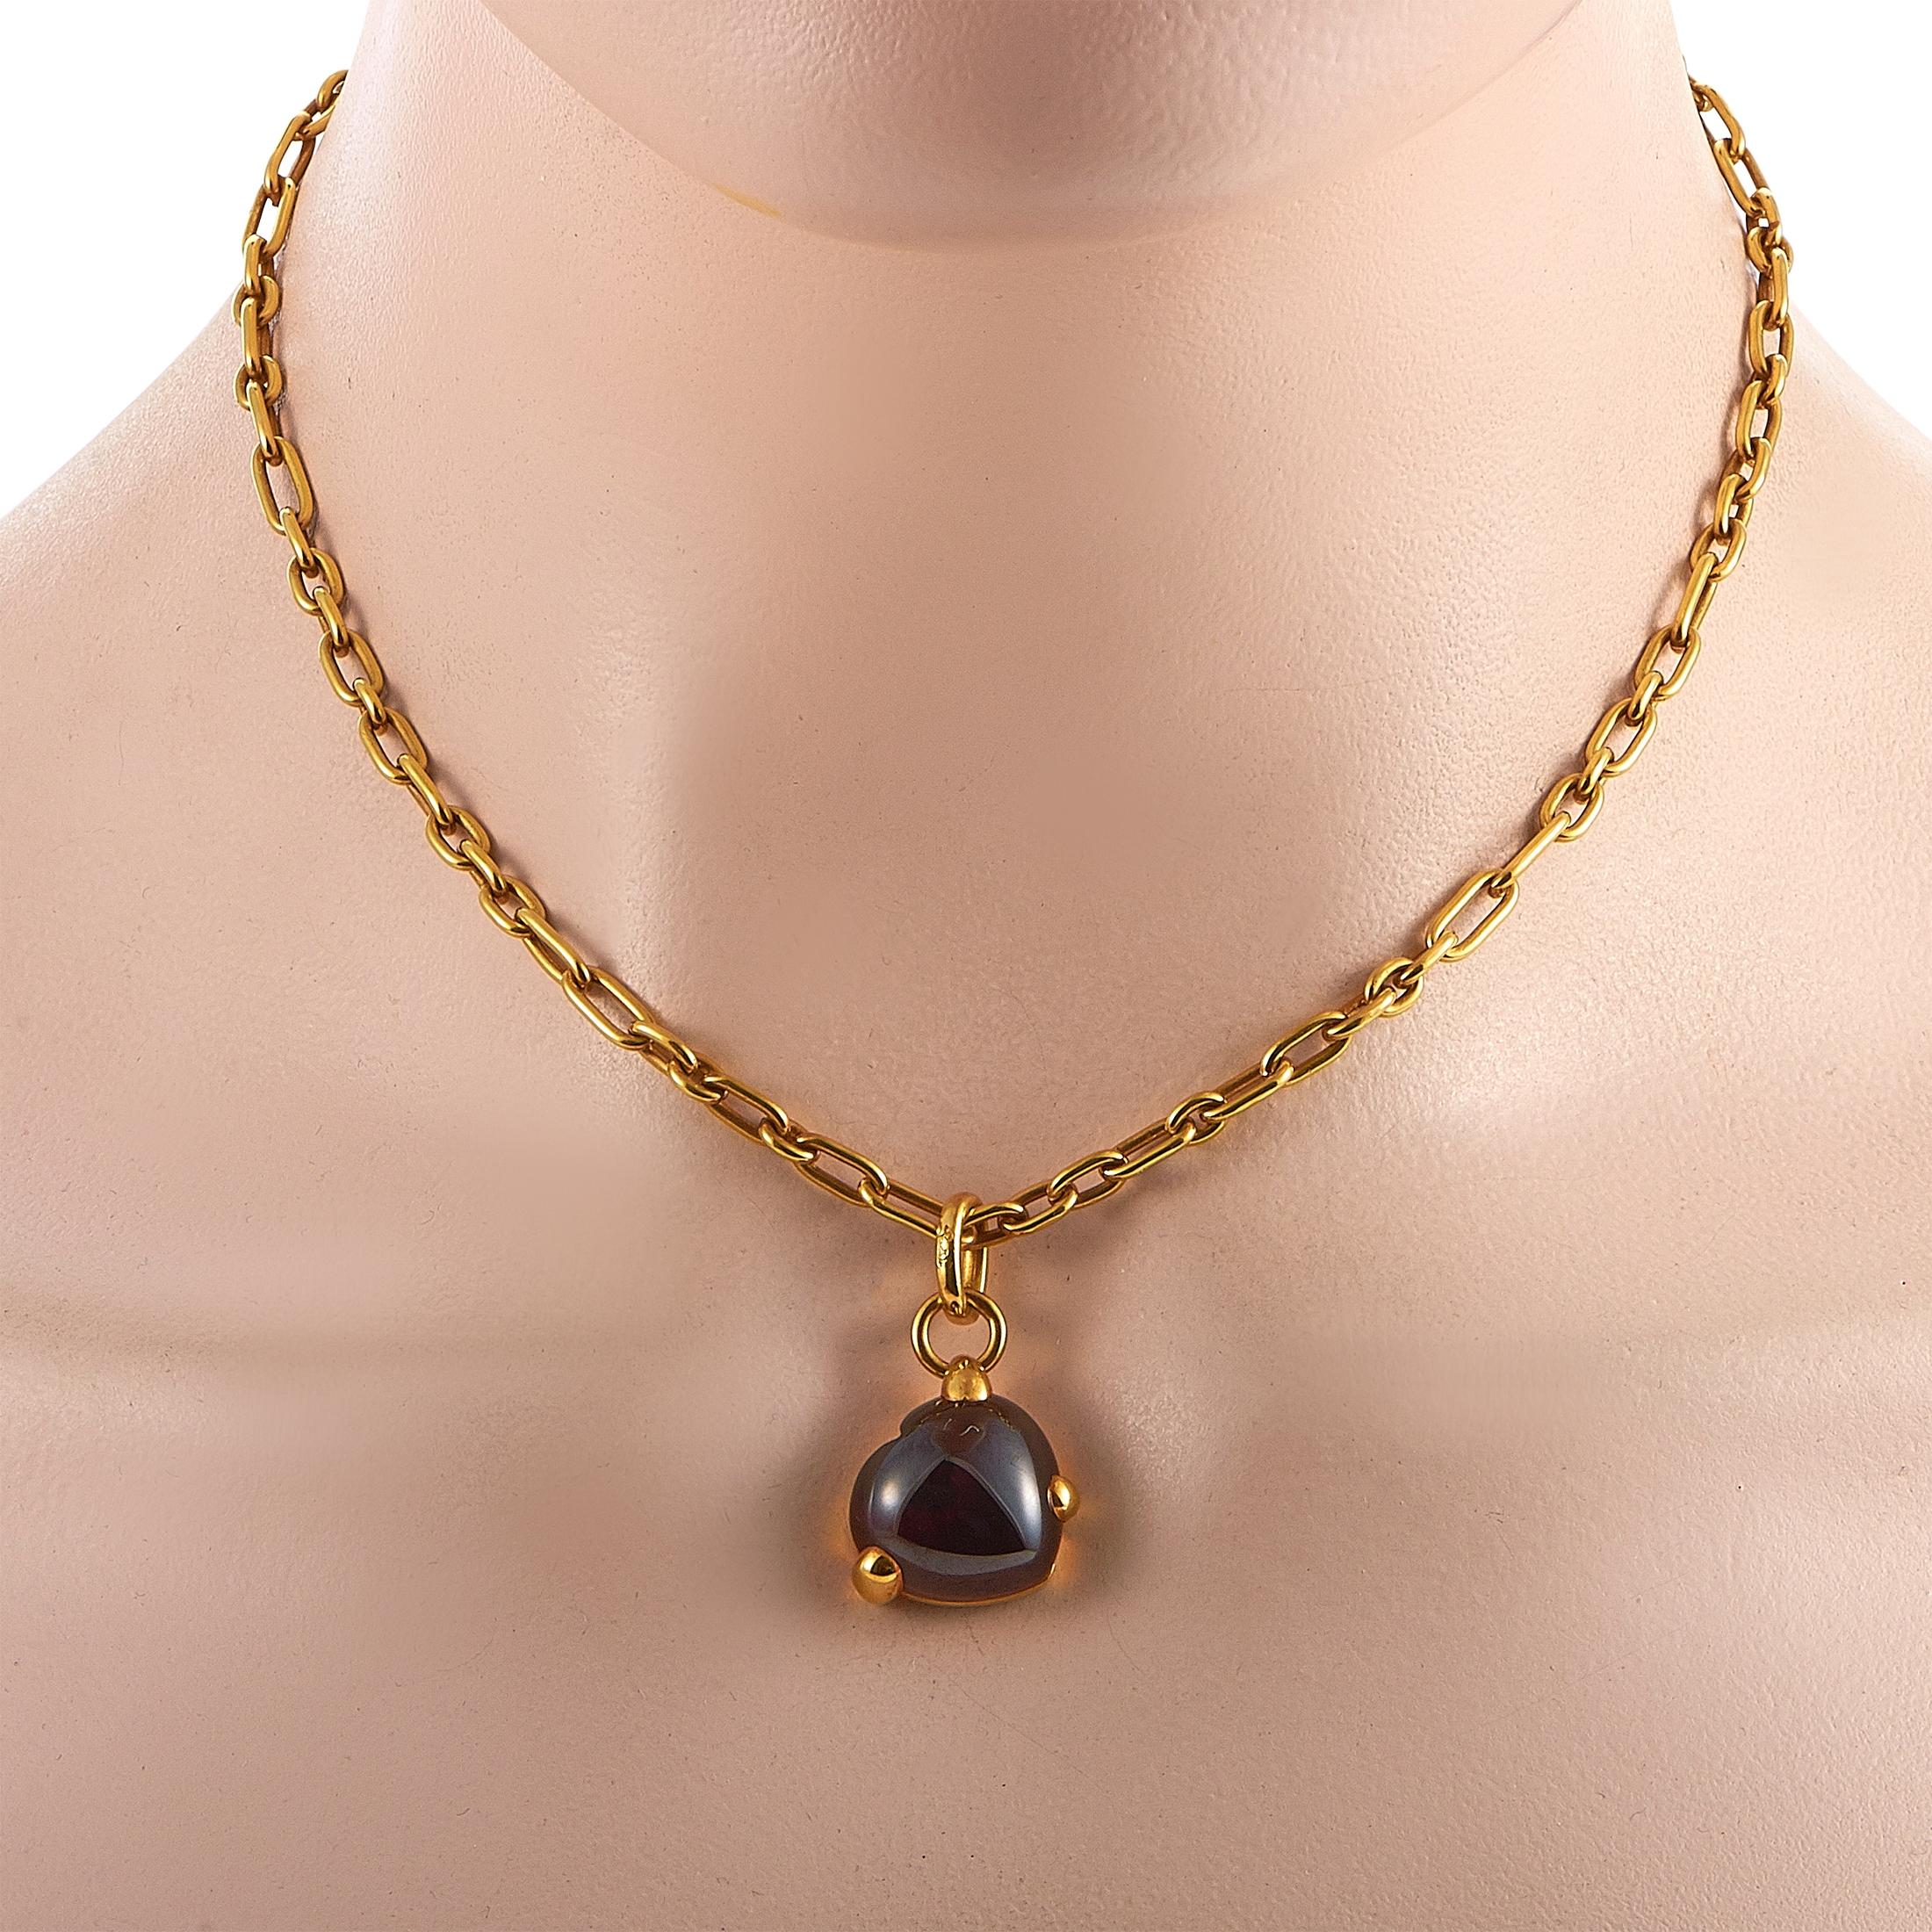 This Pomellato necklace is crafted from 18K yellow gold and embellished with a garnet. The necklace weighs 33.8 grams and is presented with a 16” chain and a pendant that measures 1.25” in length and 0.75” in width.

Offered in estate condition,